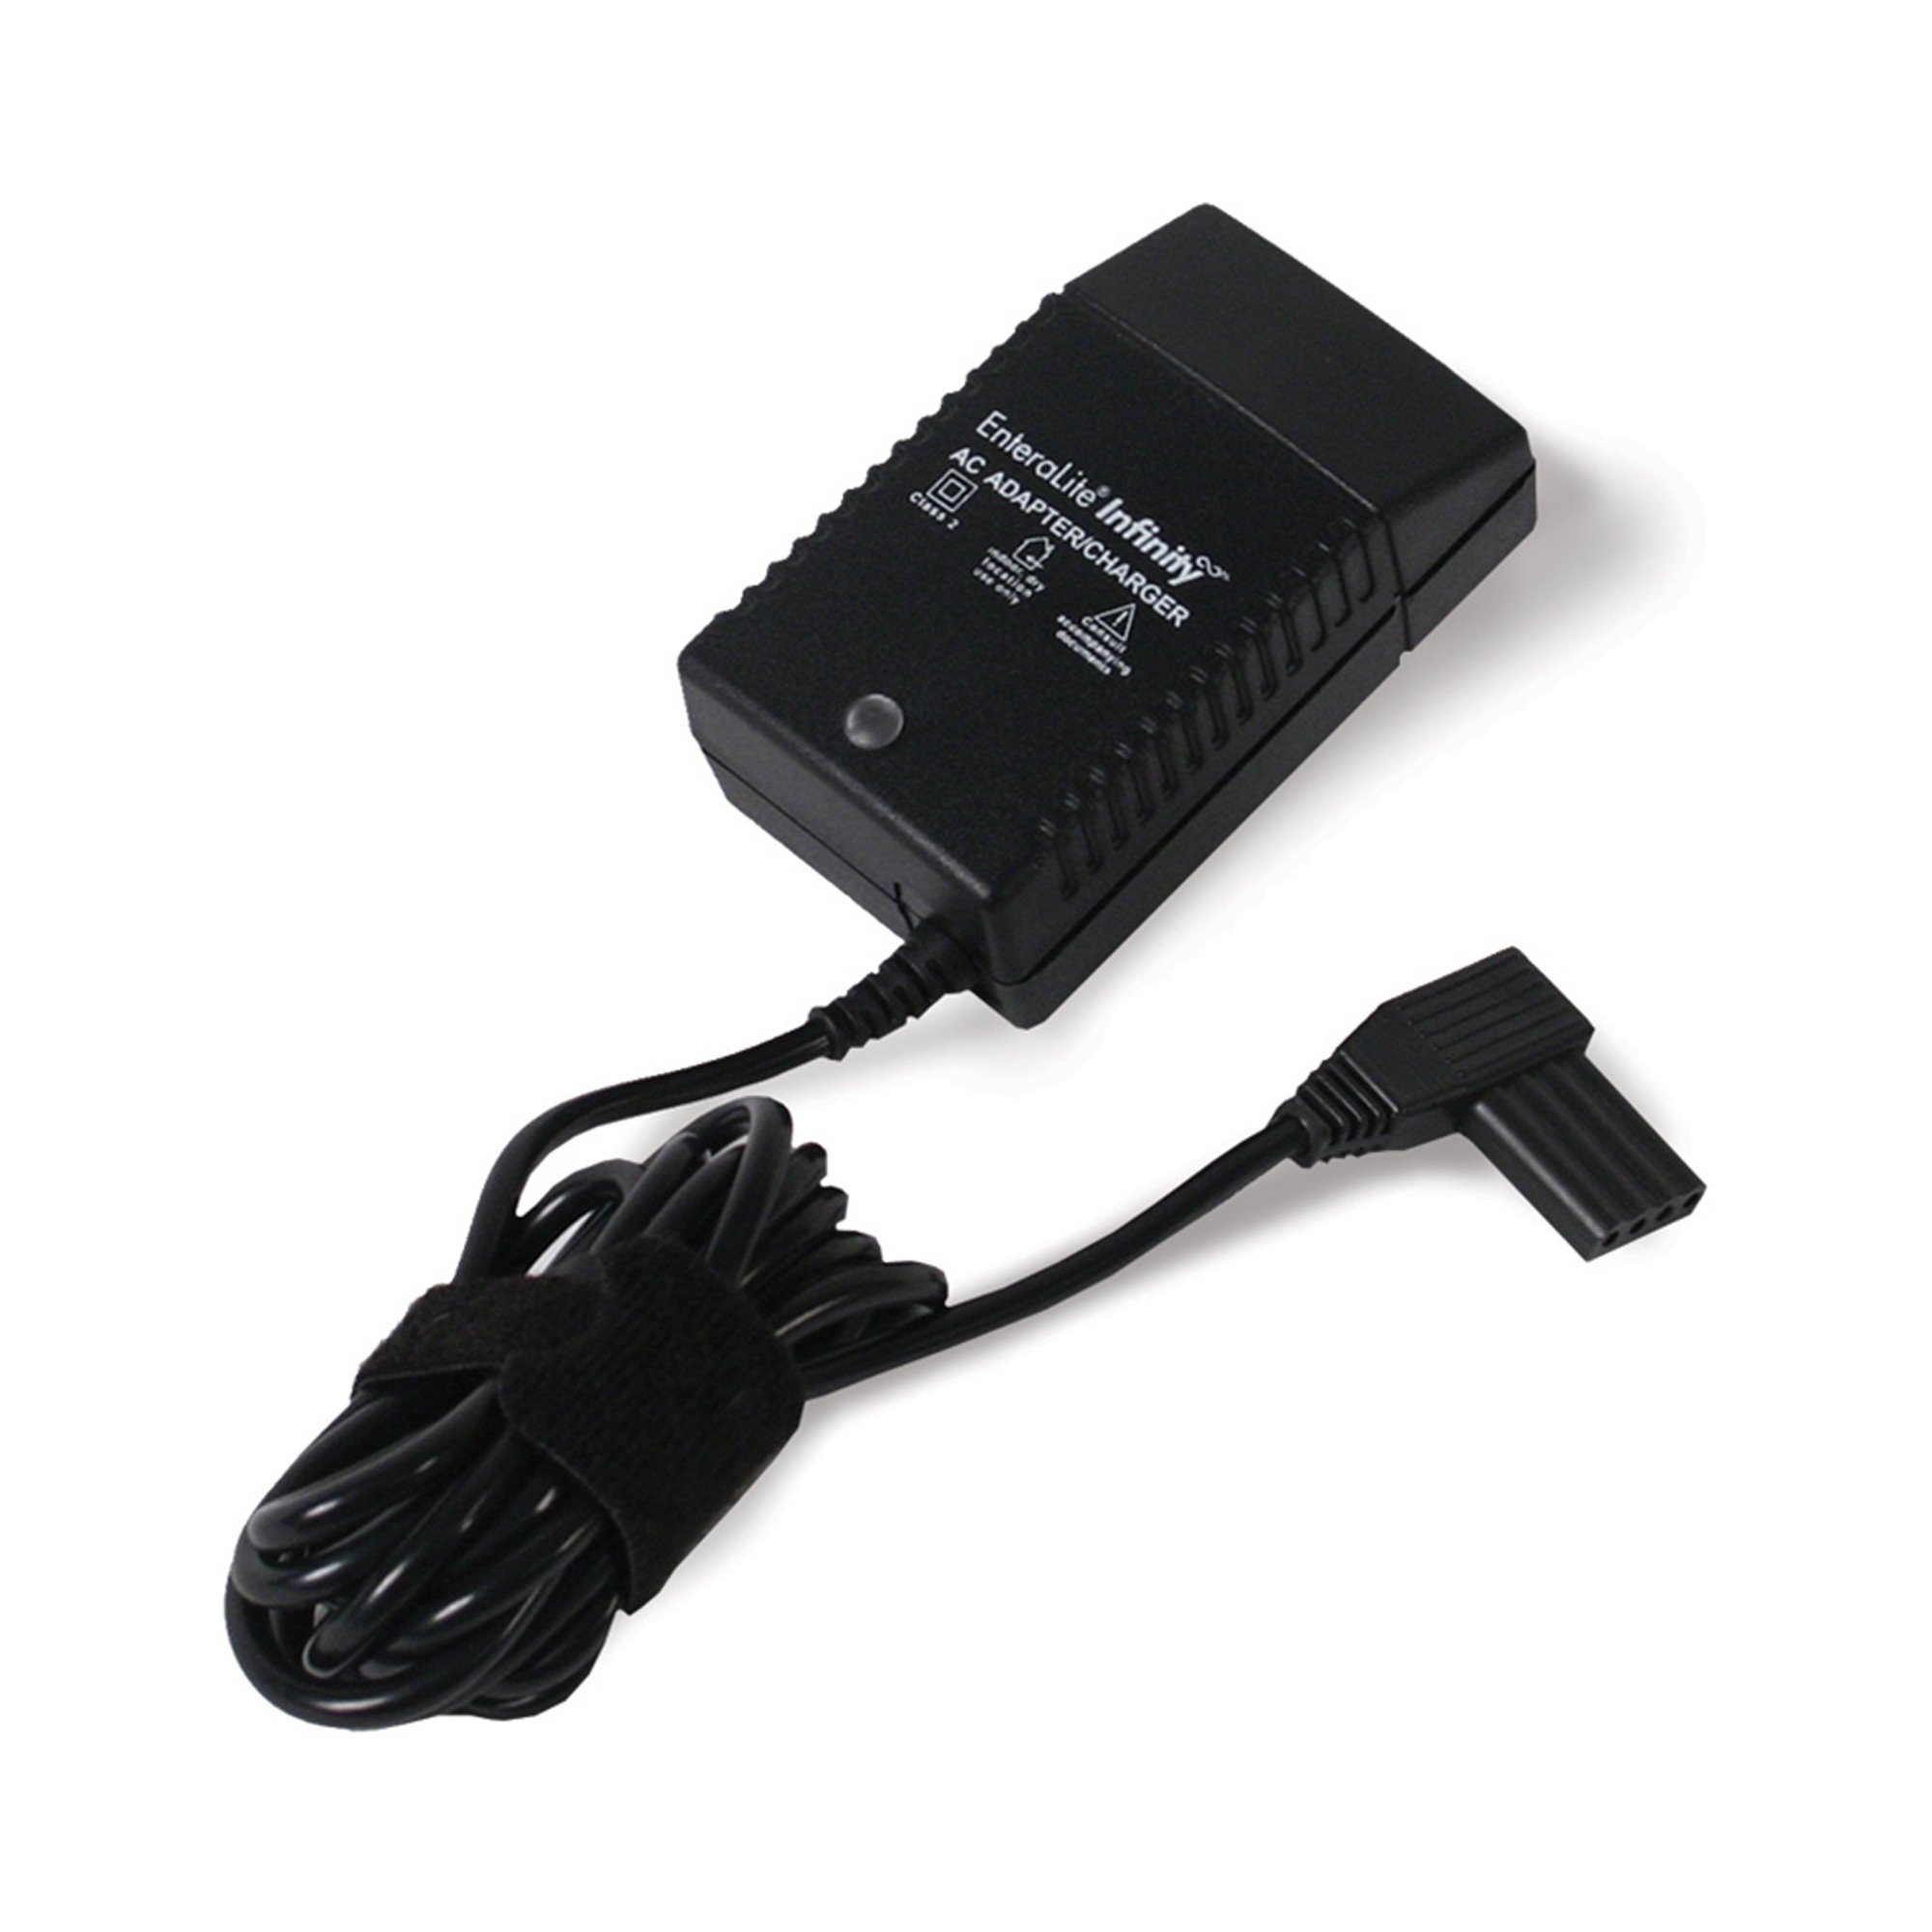 EnteraLite Infinity AC Adapter / Charger